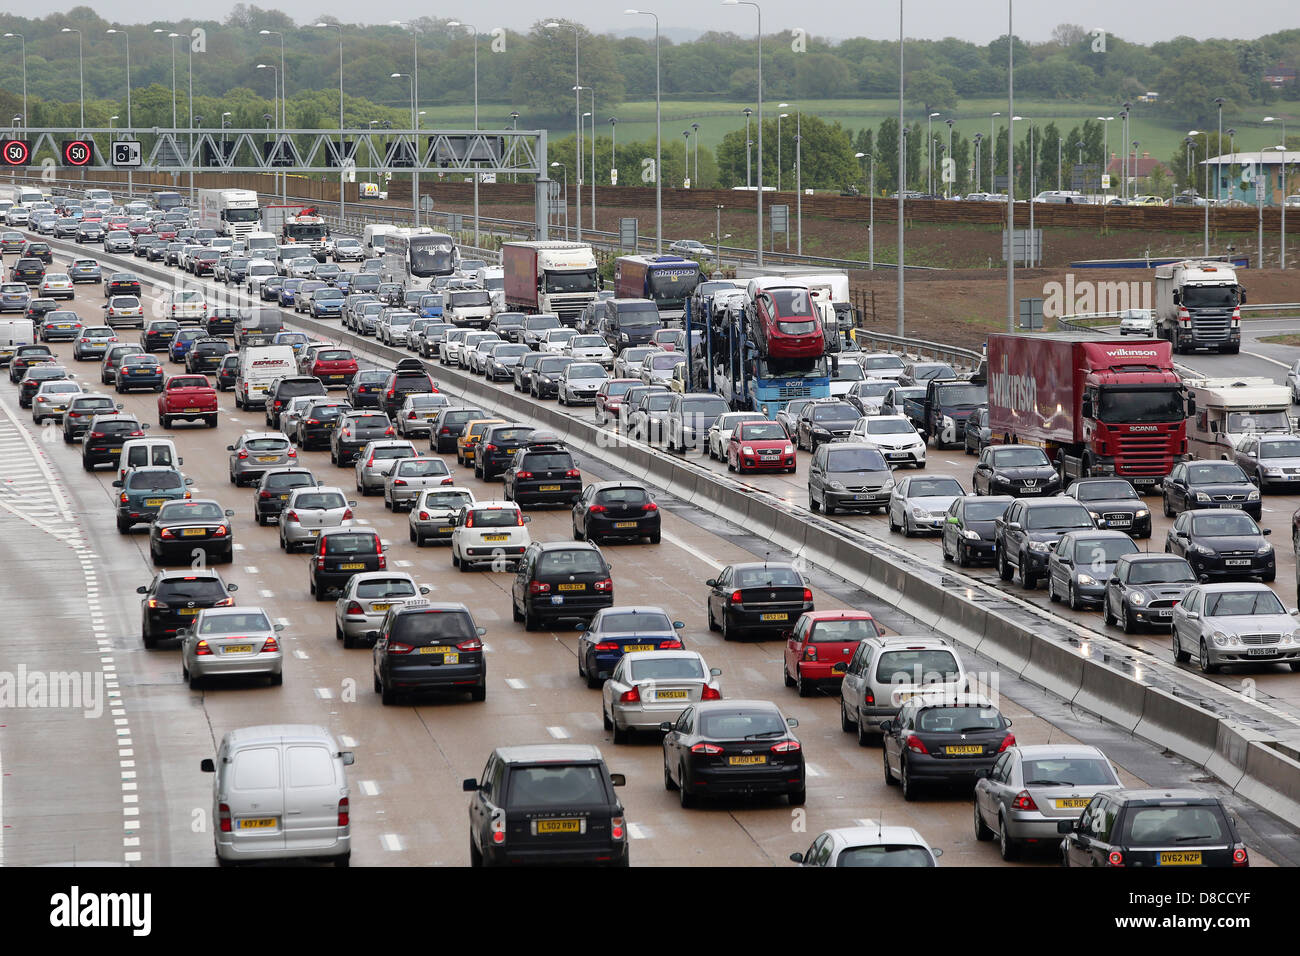 Cobham, Surrey, UK. 24th May 2013. Long delays on M25 as Bank Holiday getaway gets under way. Queues of over 70 minutes can be seen between Junctions 8-10 on the M25. Photos show traffic just past Junction 9 in Cobham, Surrey. Credit: Oliver Dixon/Alamy Live News Stock Photo